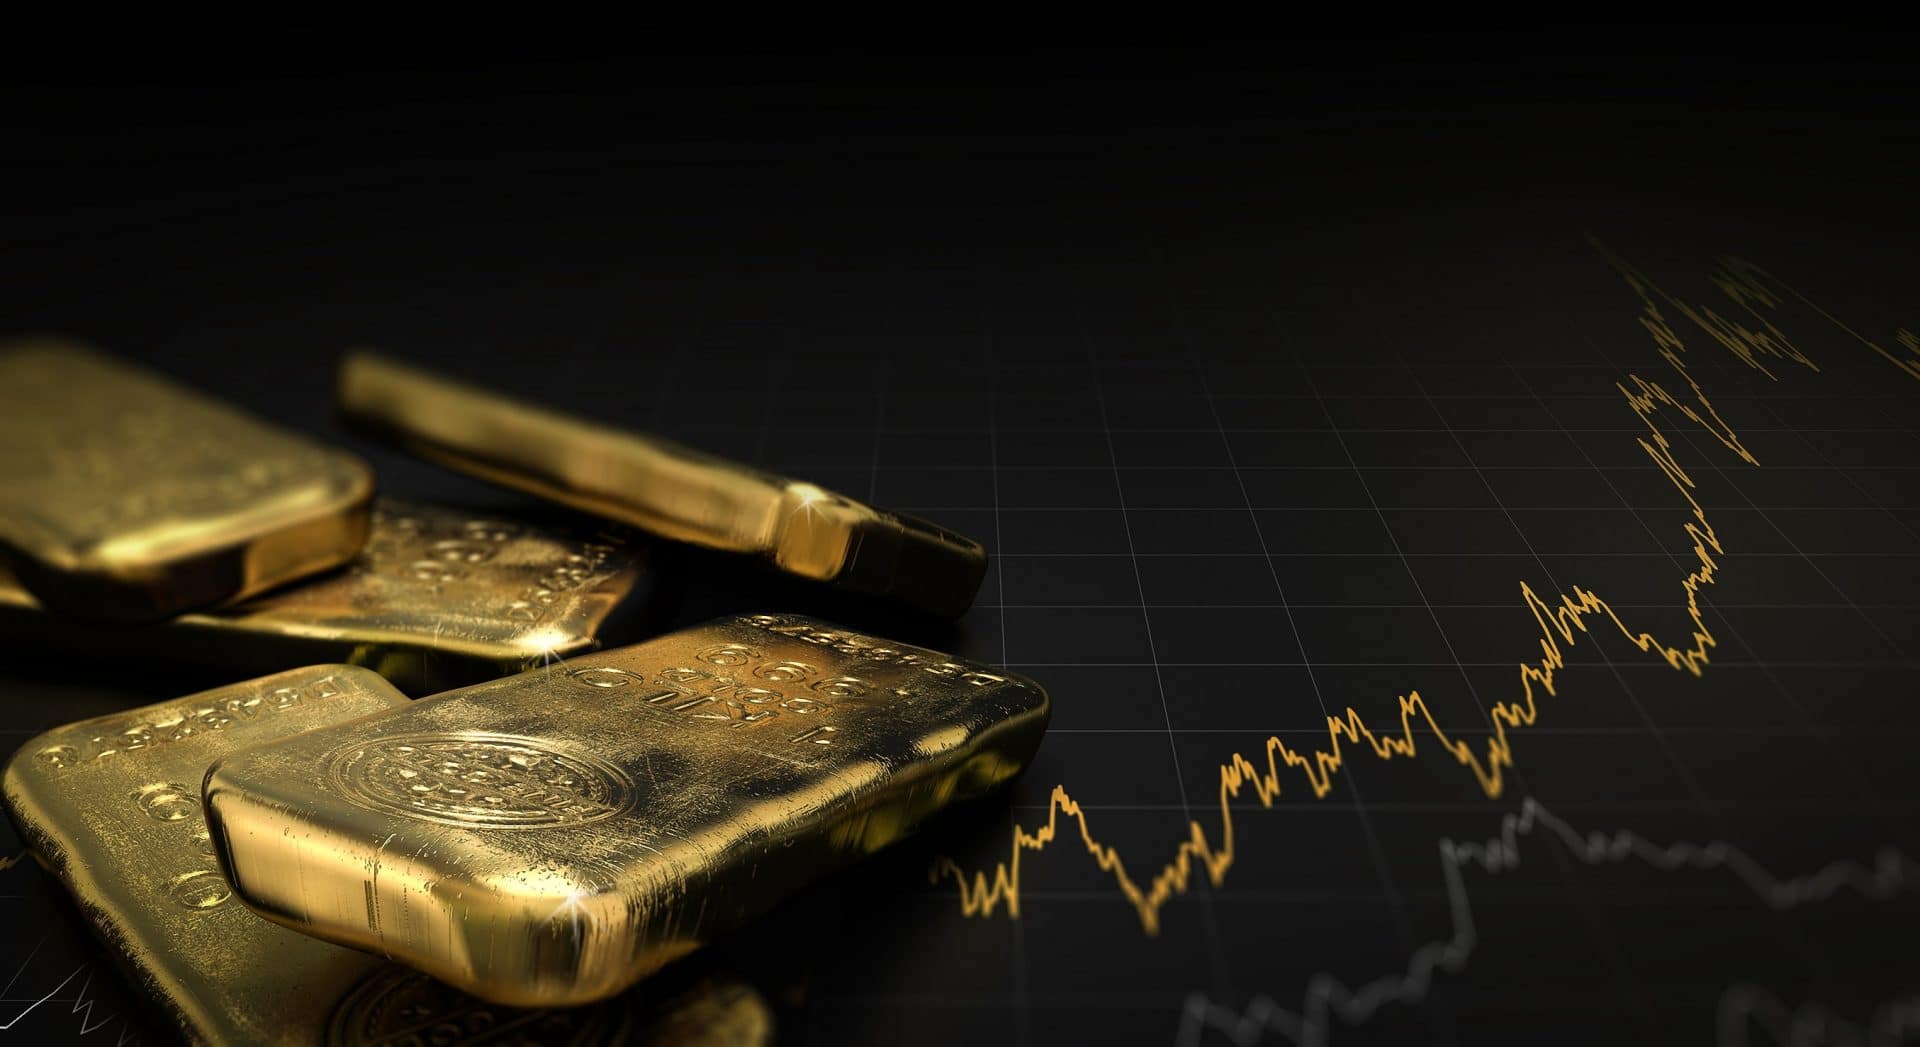 Article about Reasons You Should Invest in Precious Metals in 2022